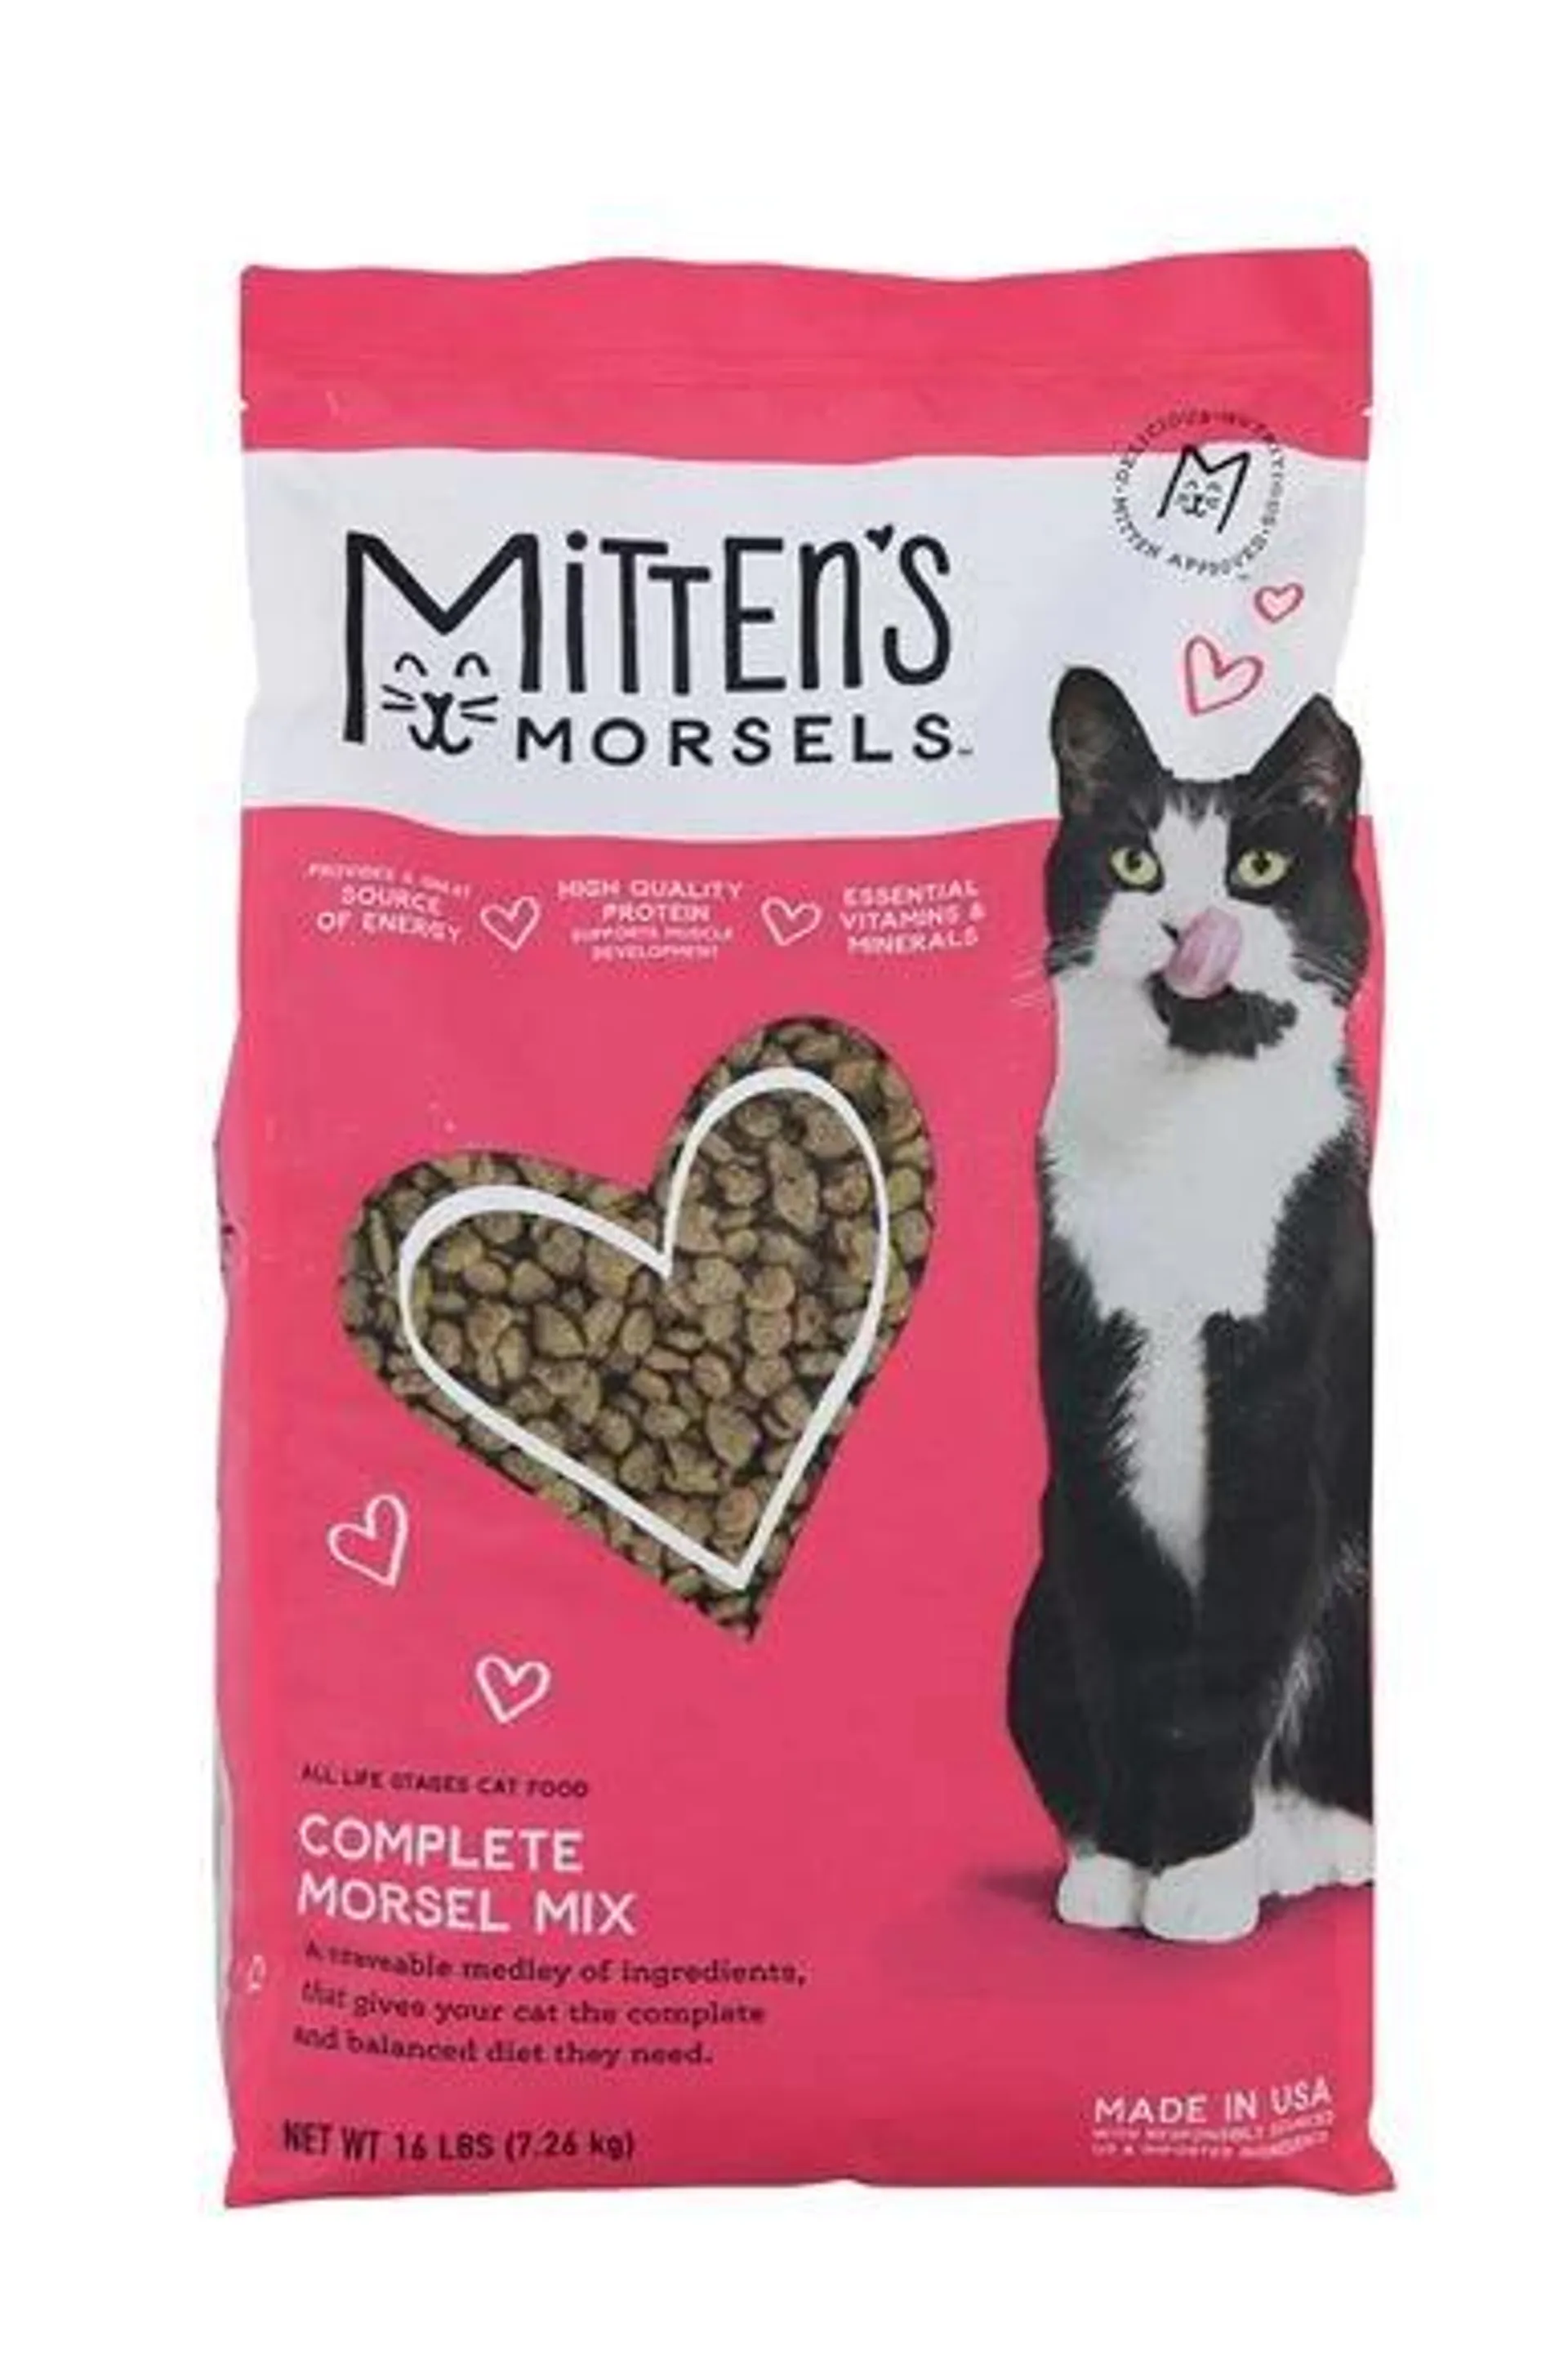 Mitten's Morsels Complete Morsel Mix Dry Cat Food, 16 pounds